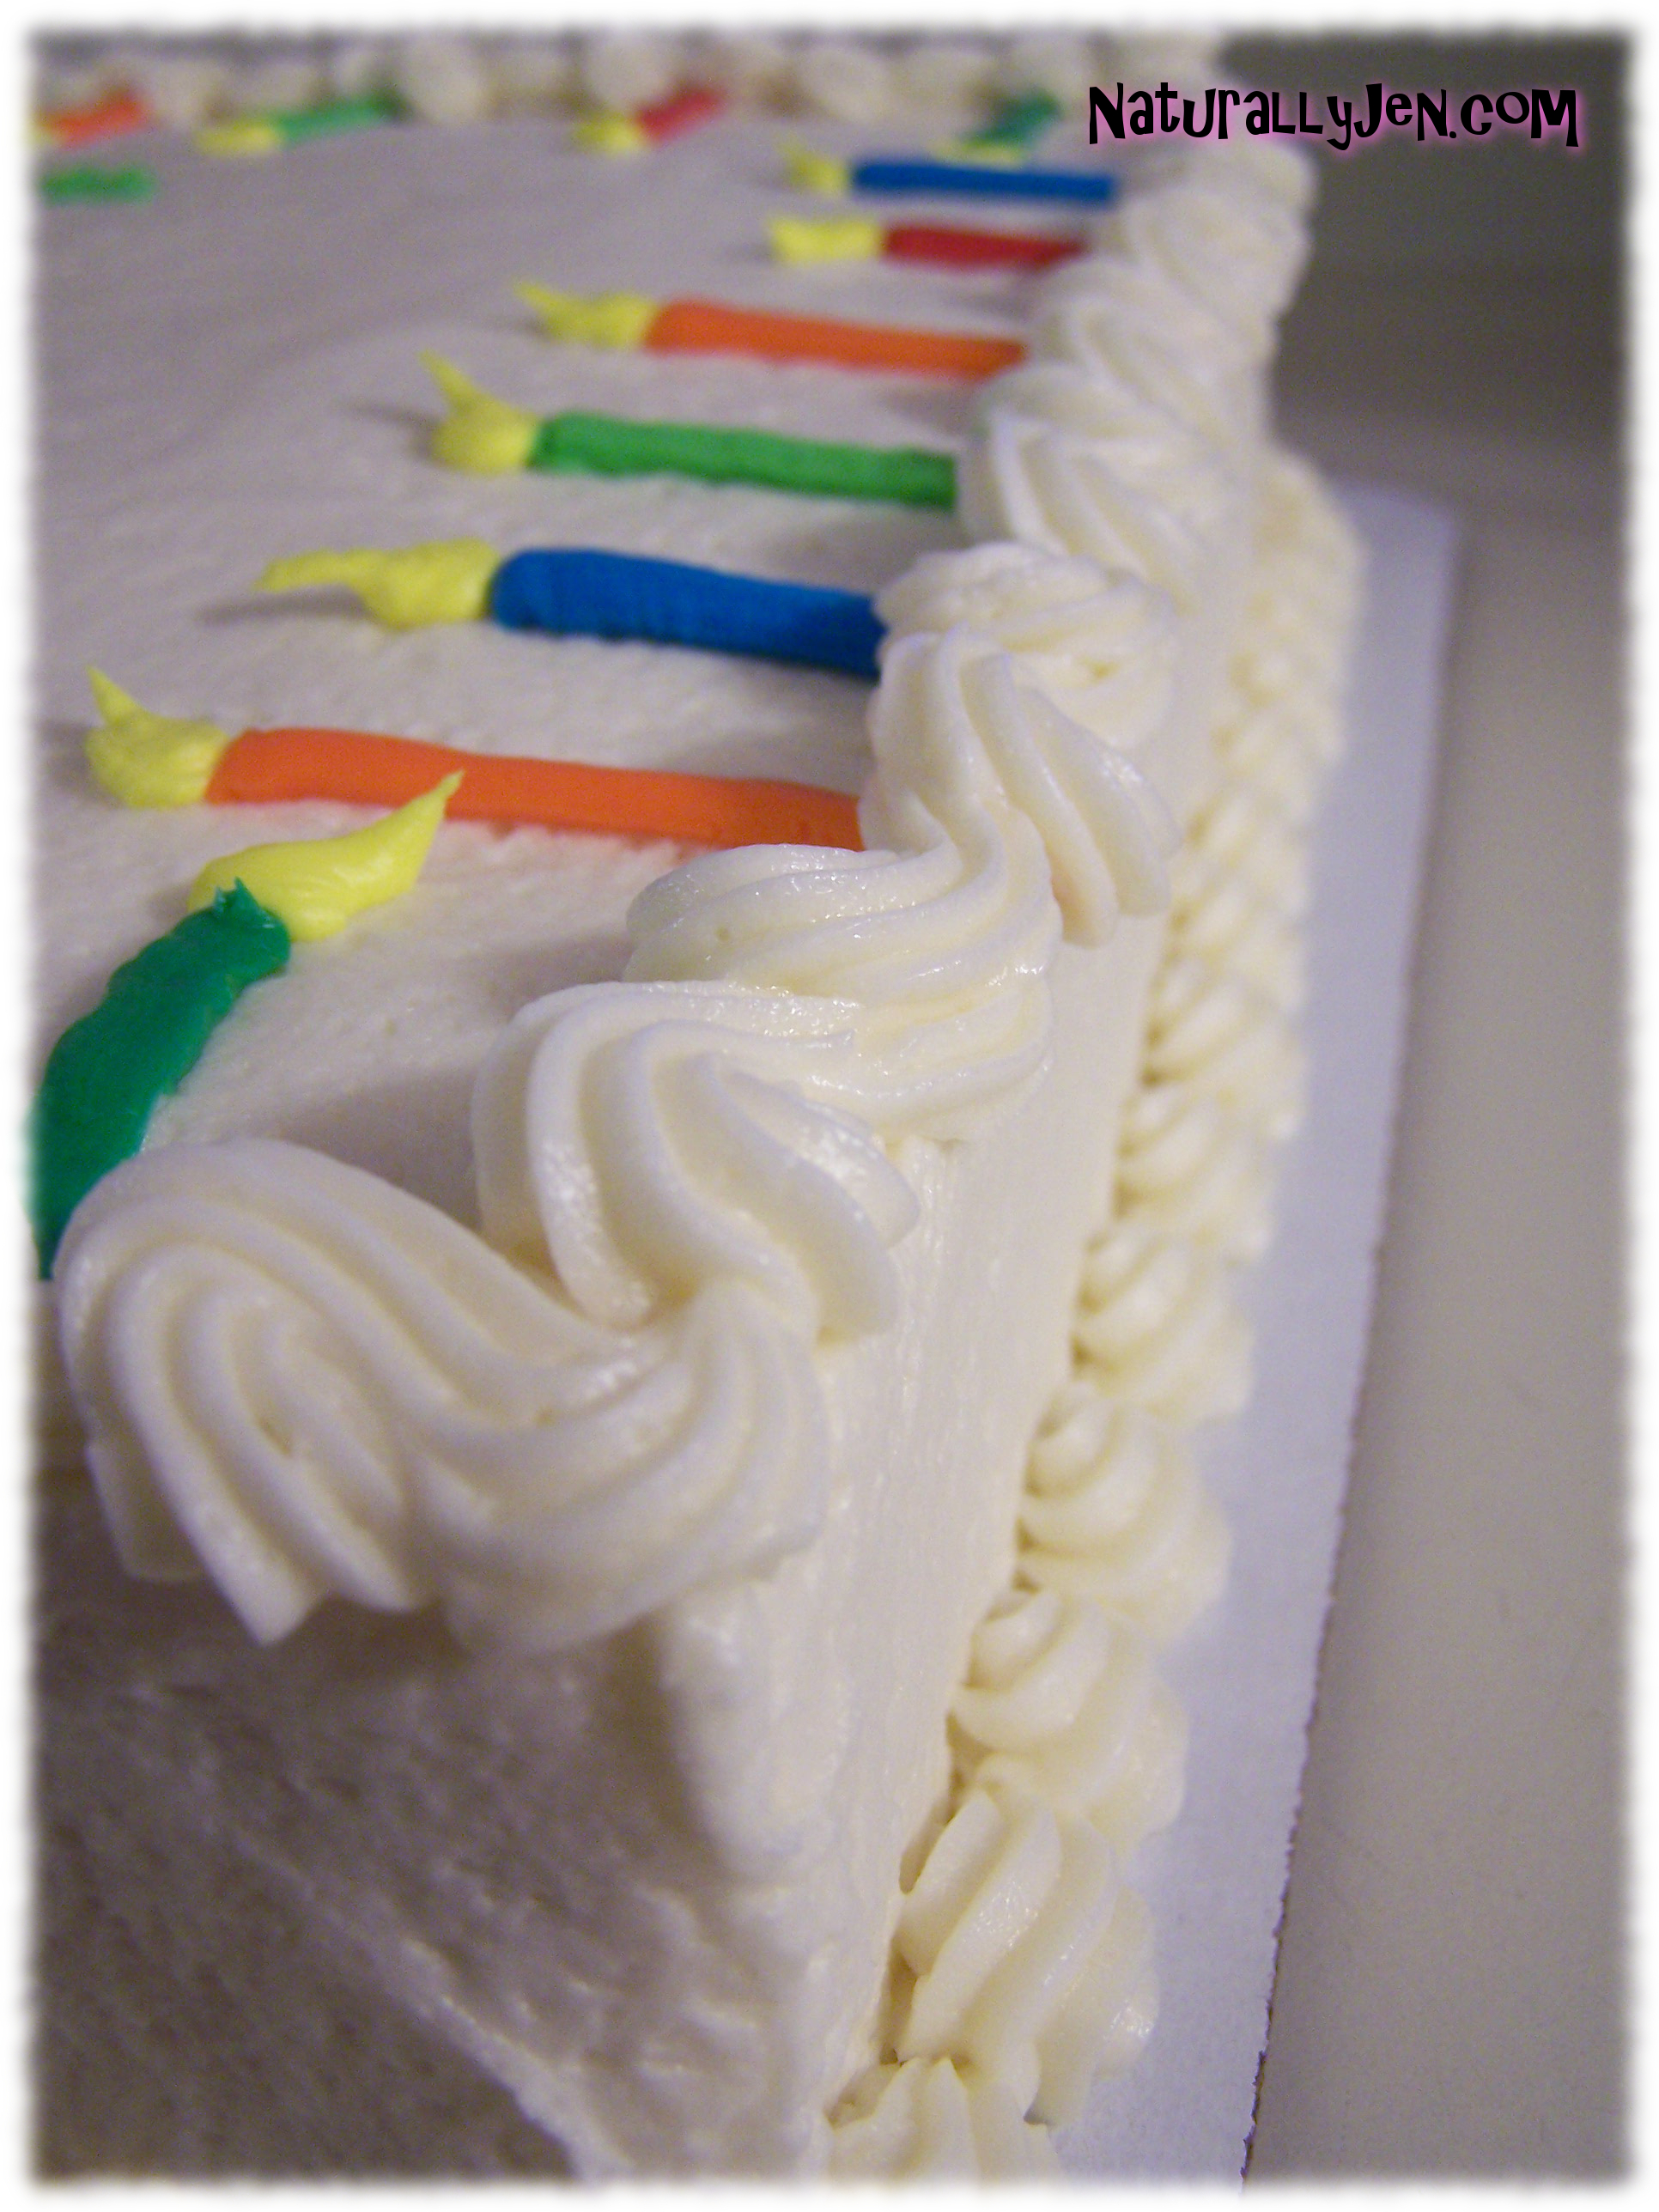 Thirtieth Birthday Cake Decorating Ideas 30 frosting candles